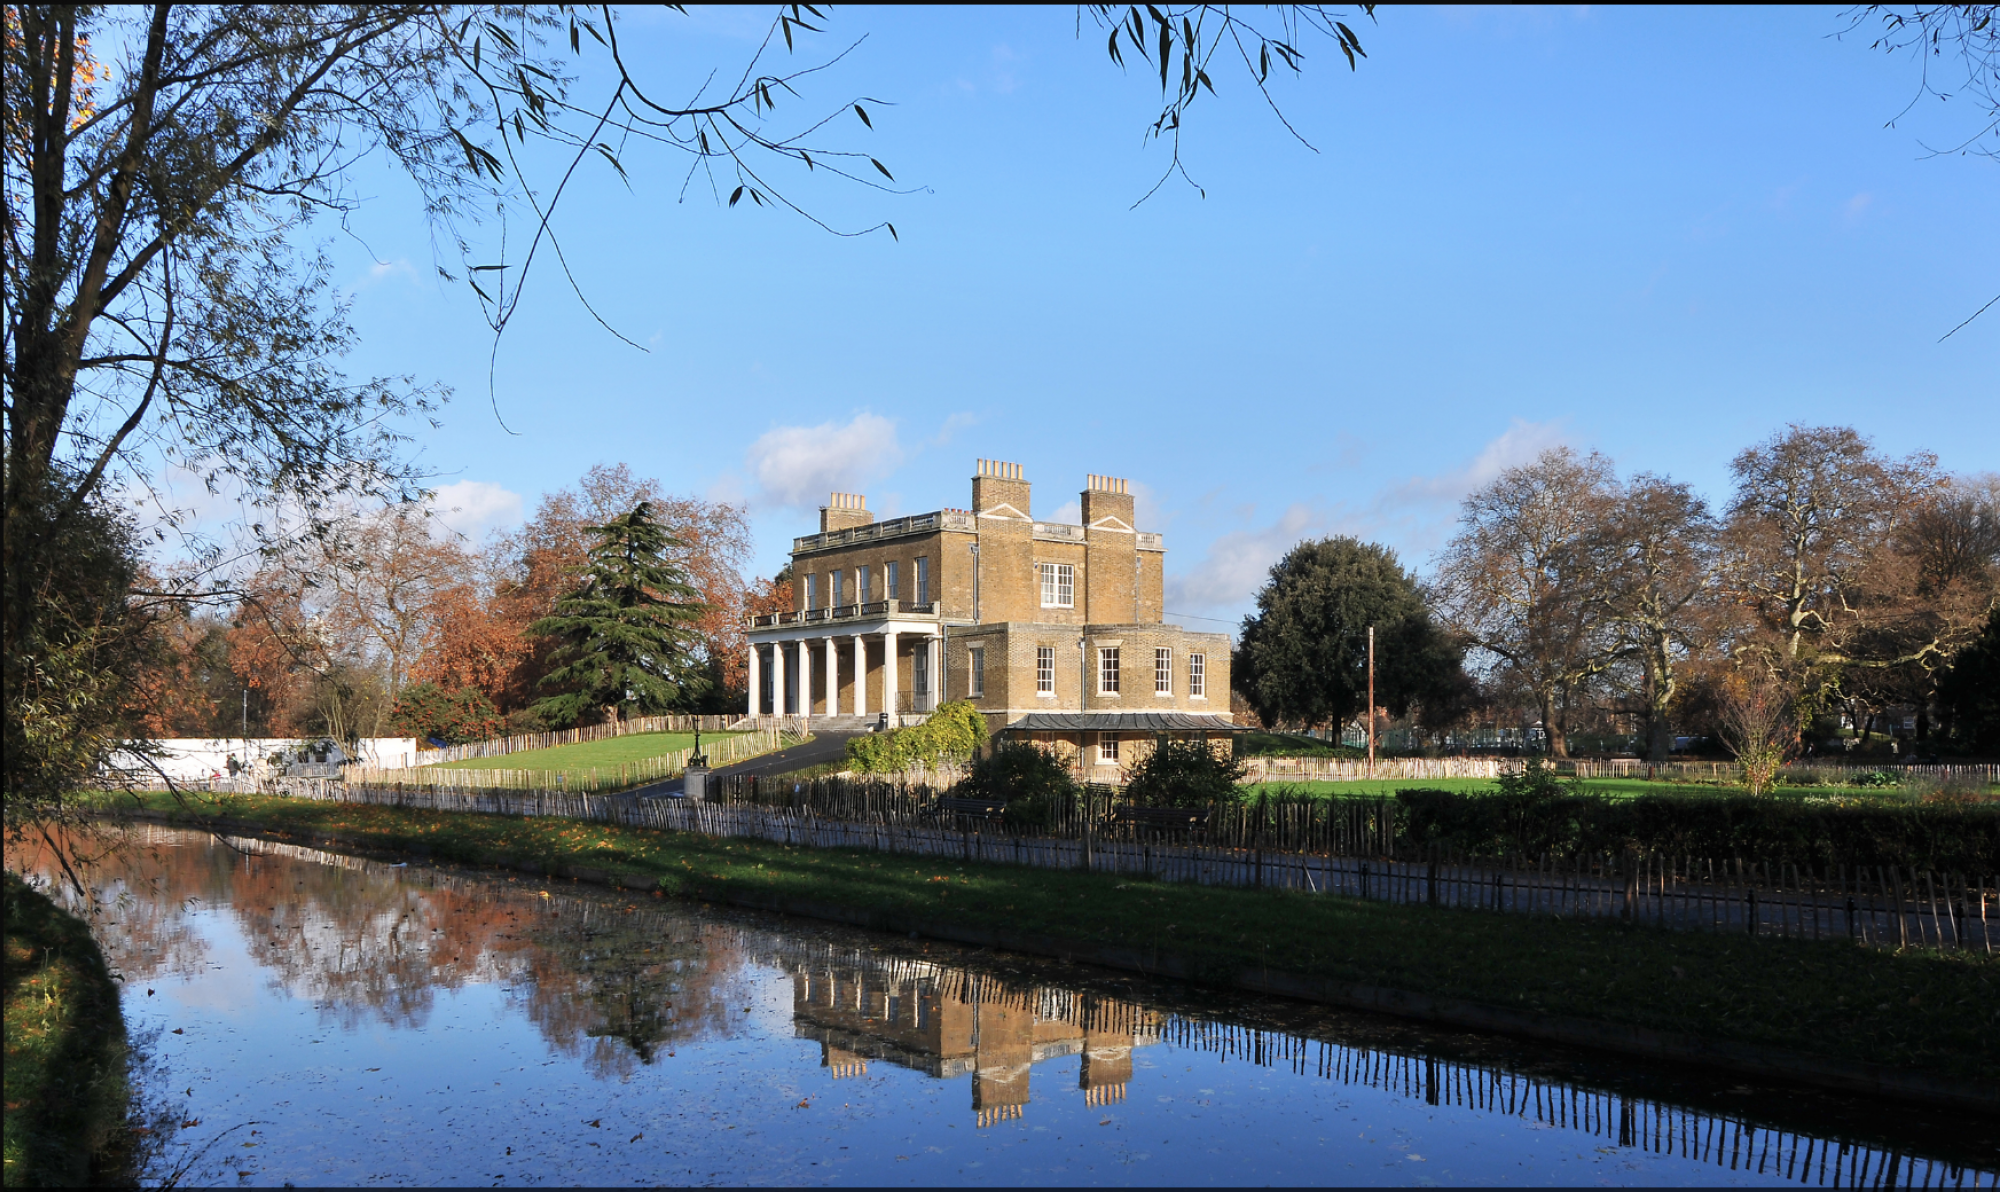 Clissold House